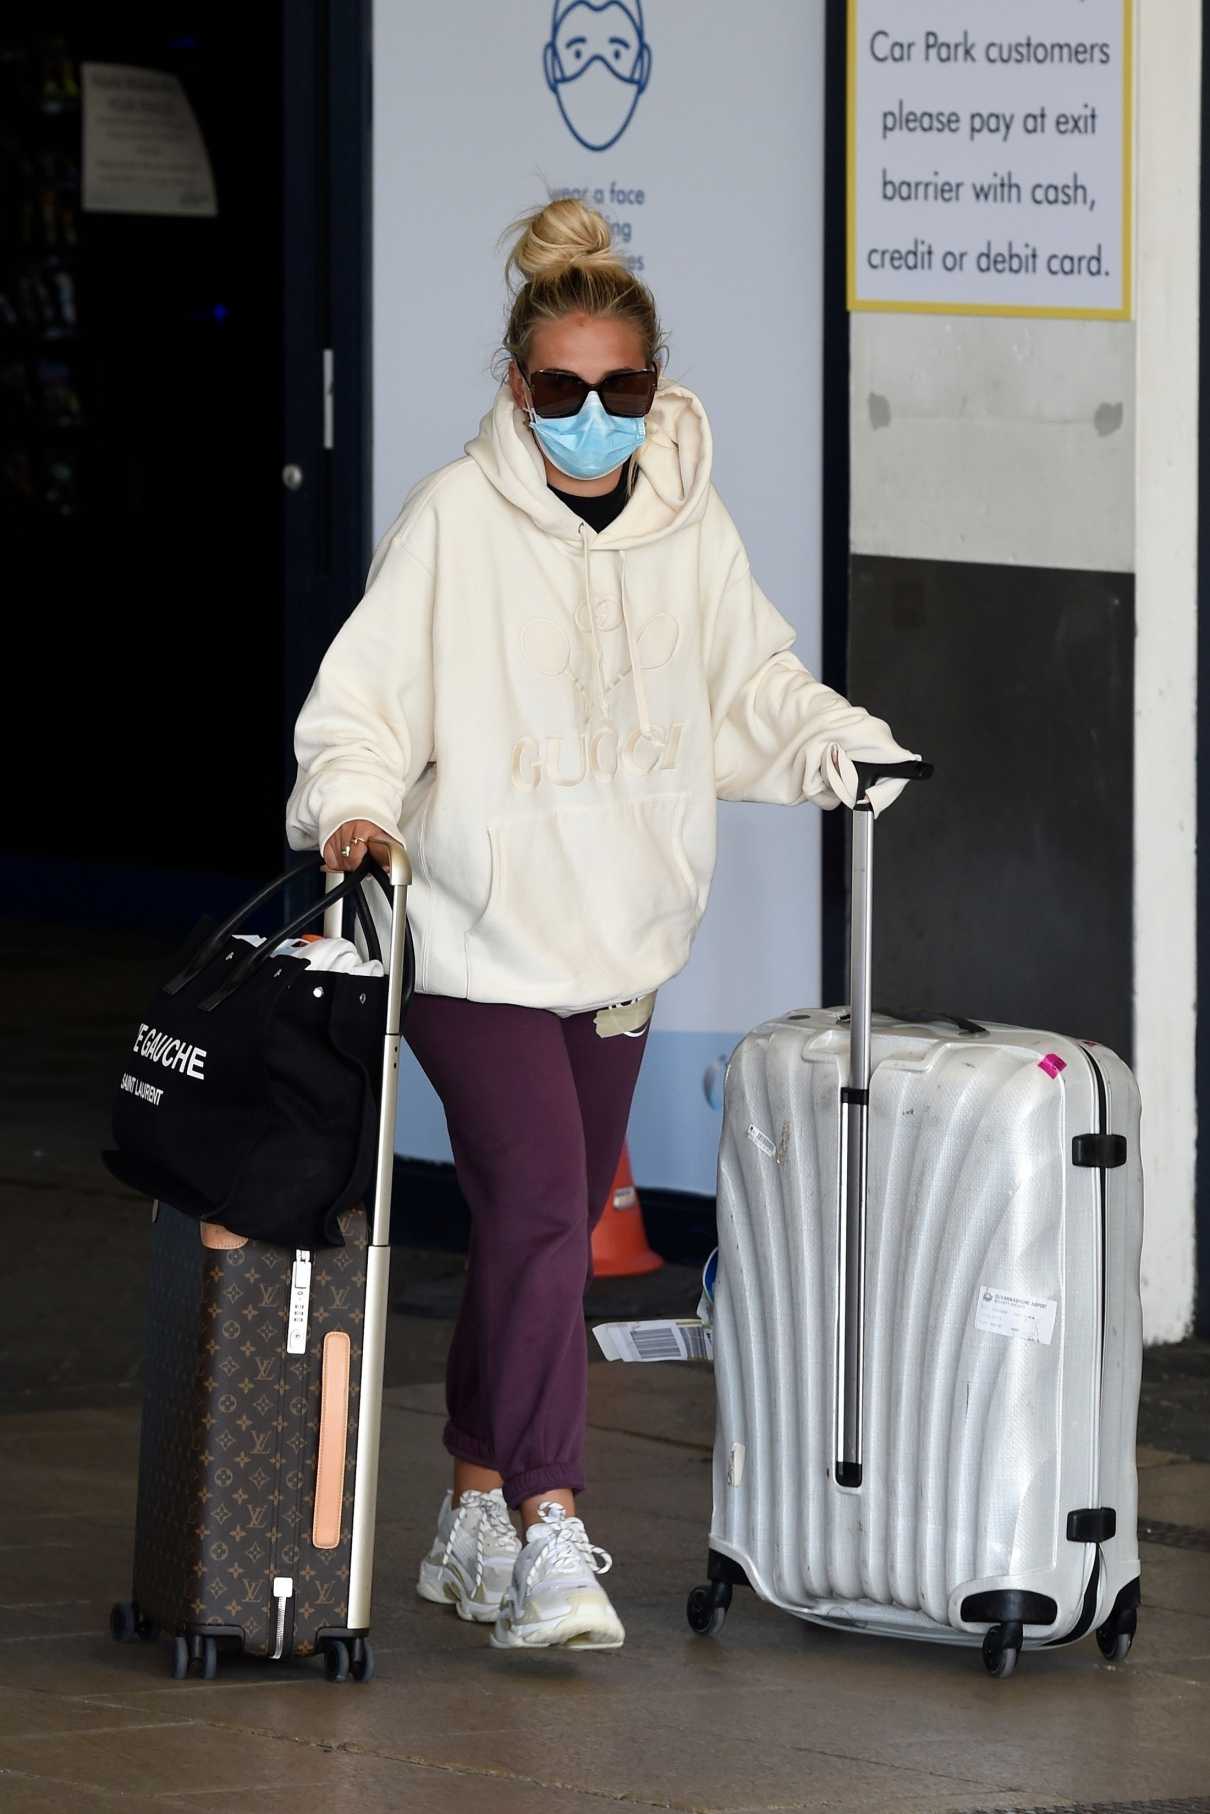 Molly-Mae Hague poses with £4k designer luggage in the airport